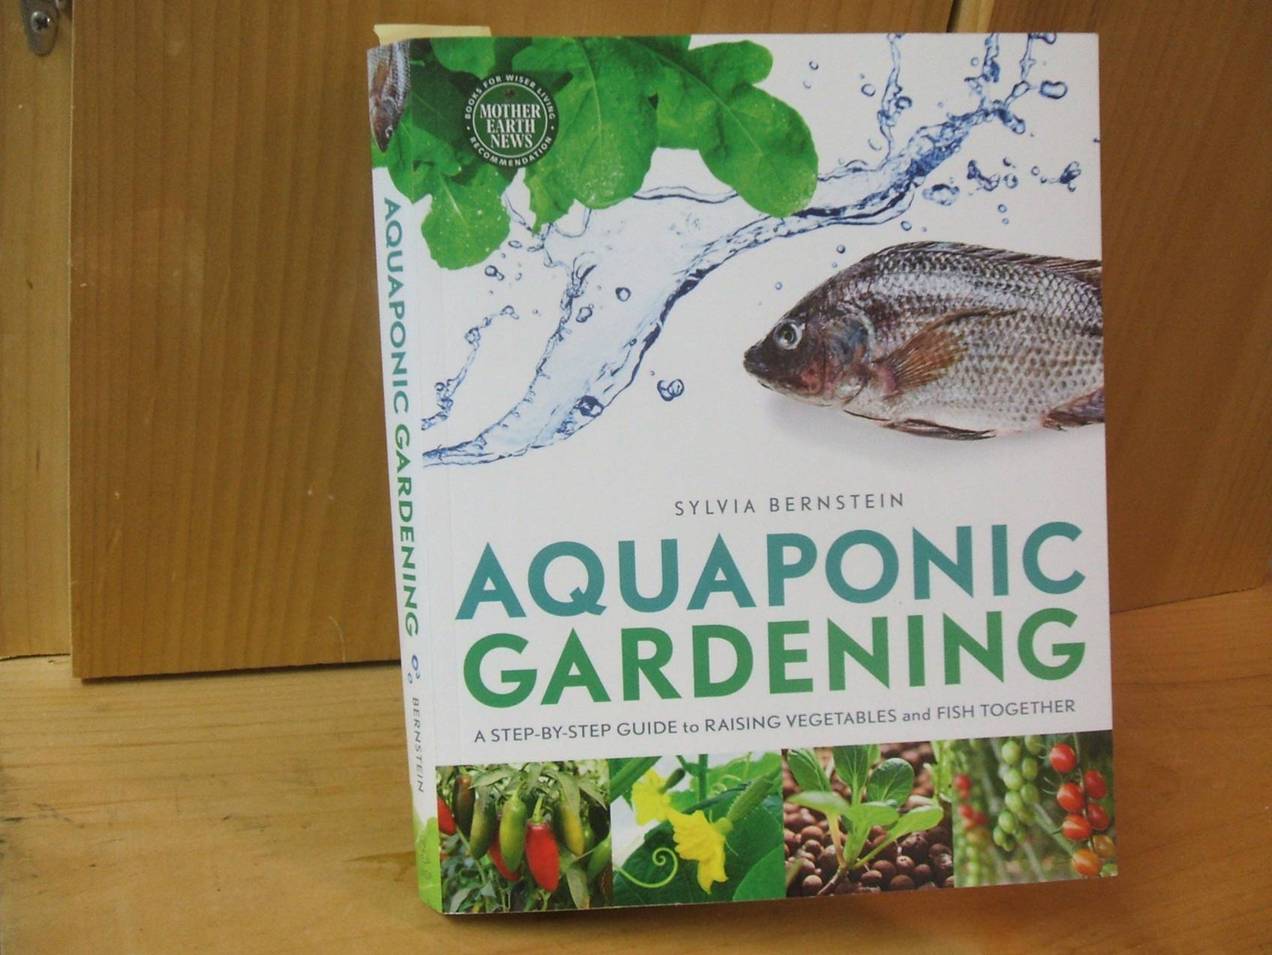  Laboratory: Book Review: Aquaponic Gardening by Sylvia Bernstein